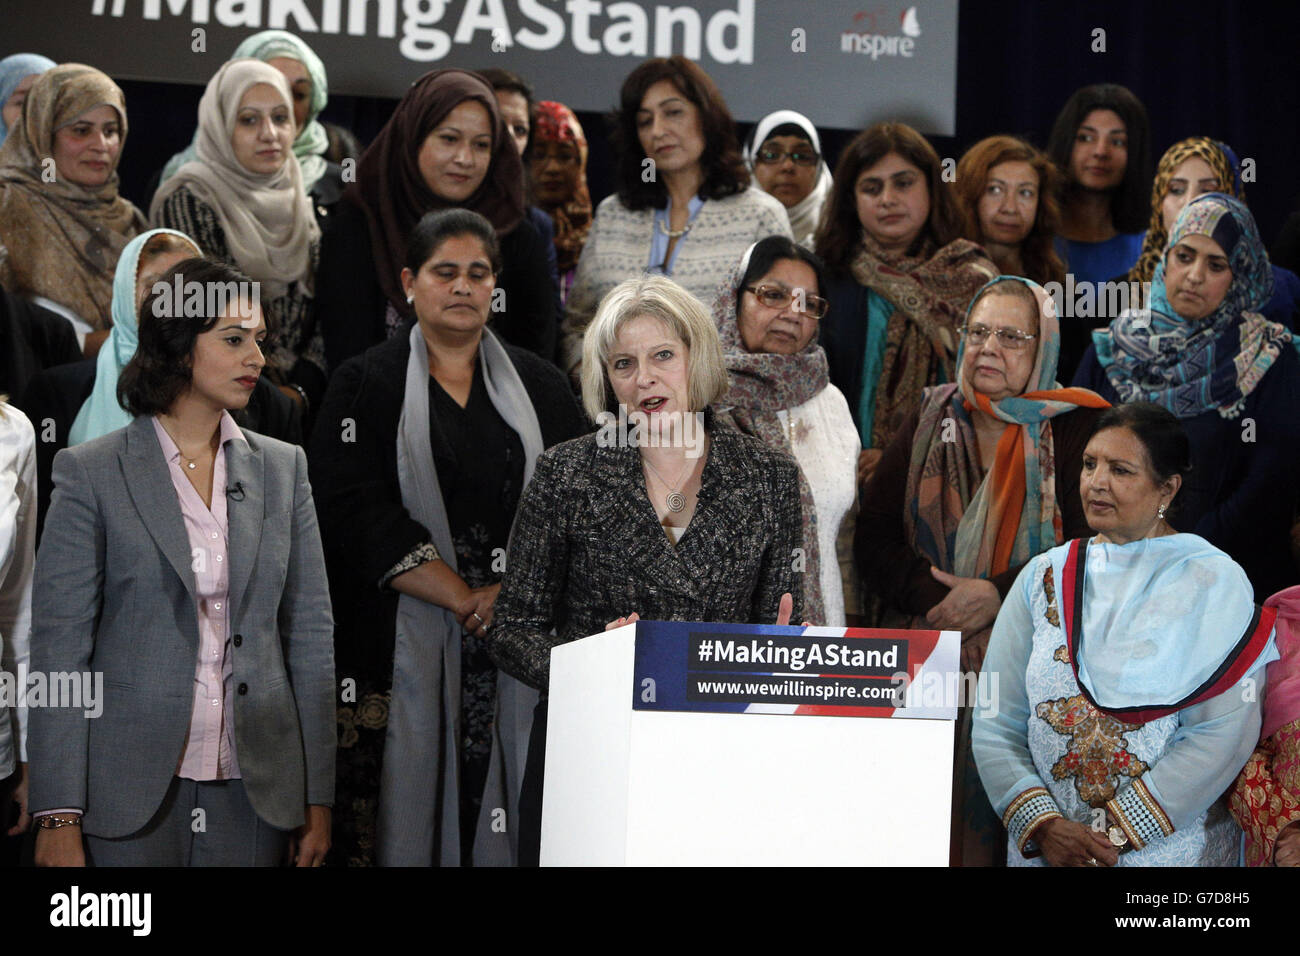 Home Secretary Theresa May speaks at the Making A Stand launch event in central London, the event which was organised by Inspire features Muslim women from across the UK who are making a united stand rejecting the barbarism of the Islamic State. Stock Photo